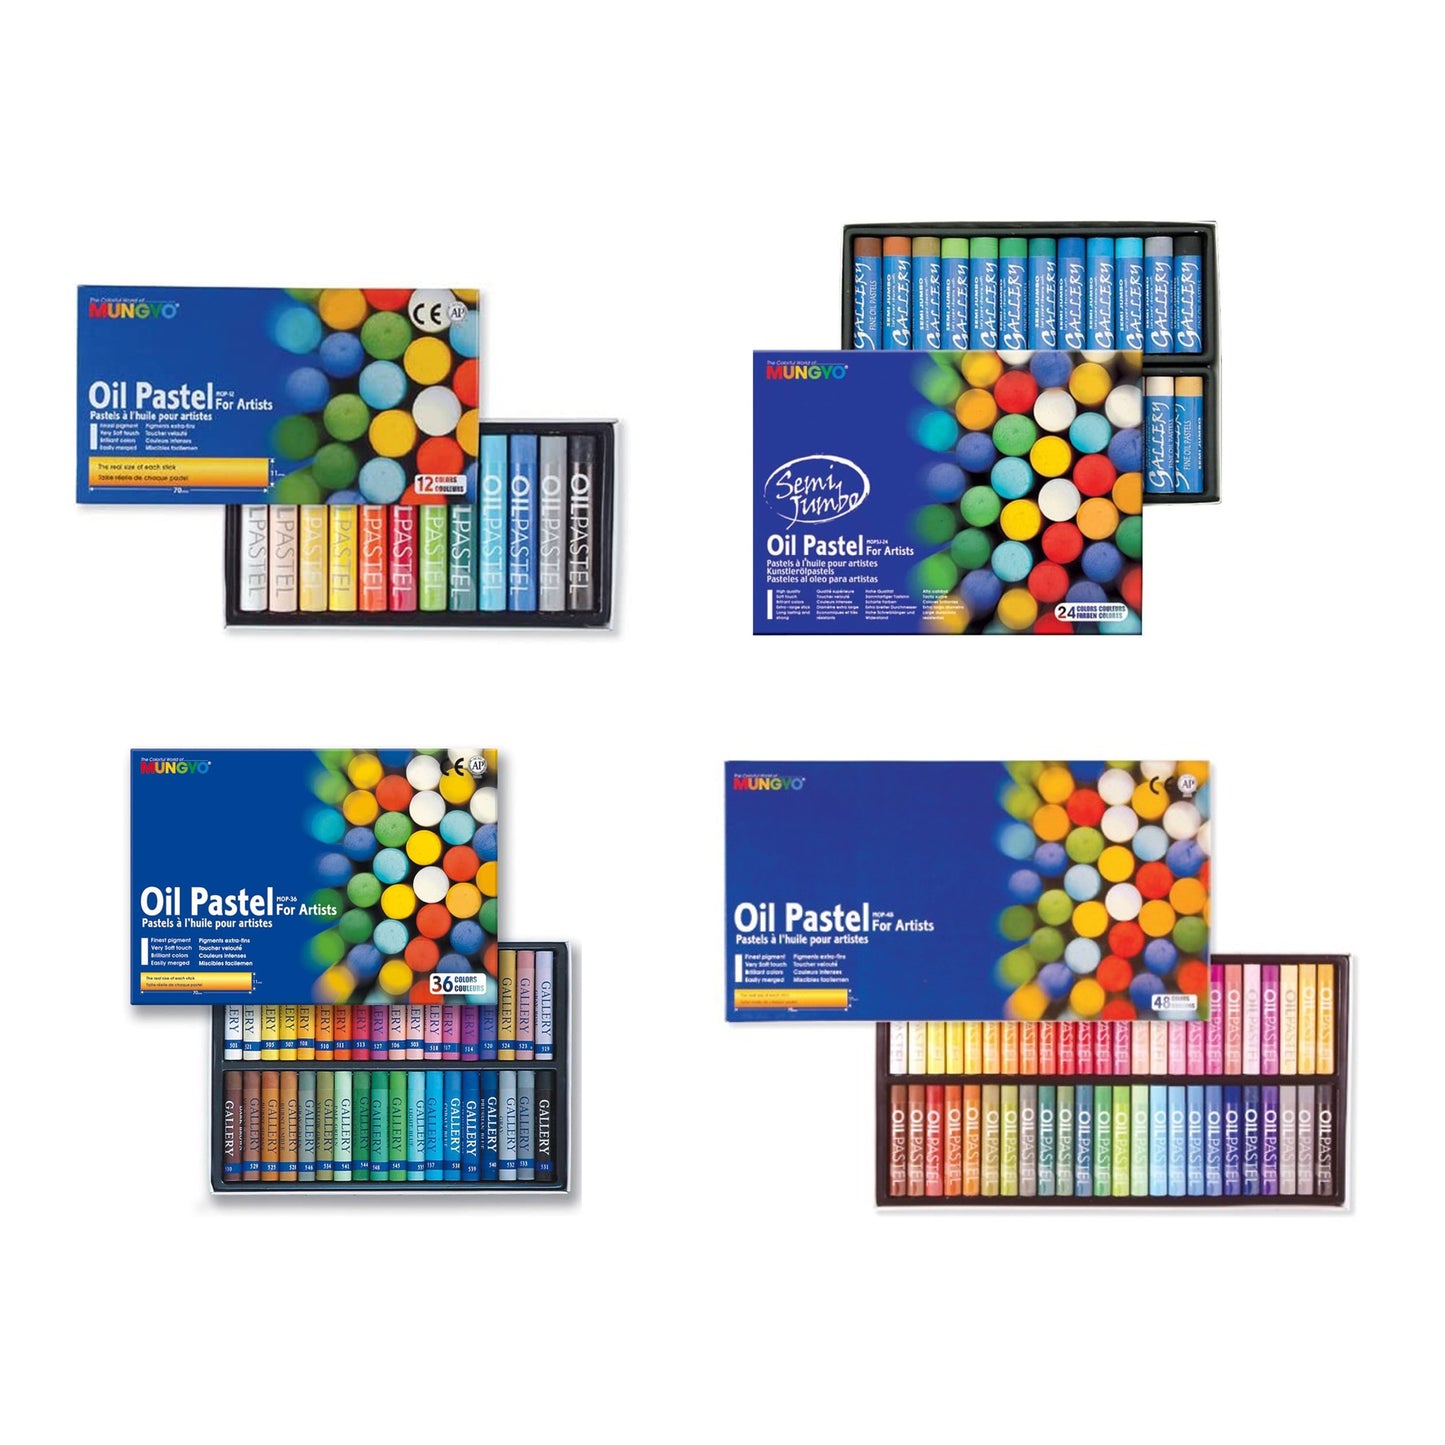 Mungyo Gallery Oil Pastels Cardboard Box Set - Assorted Colors (12, 24, 36, 48 Colors)